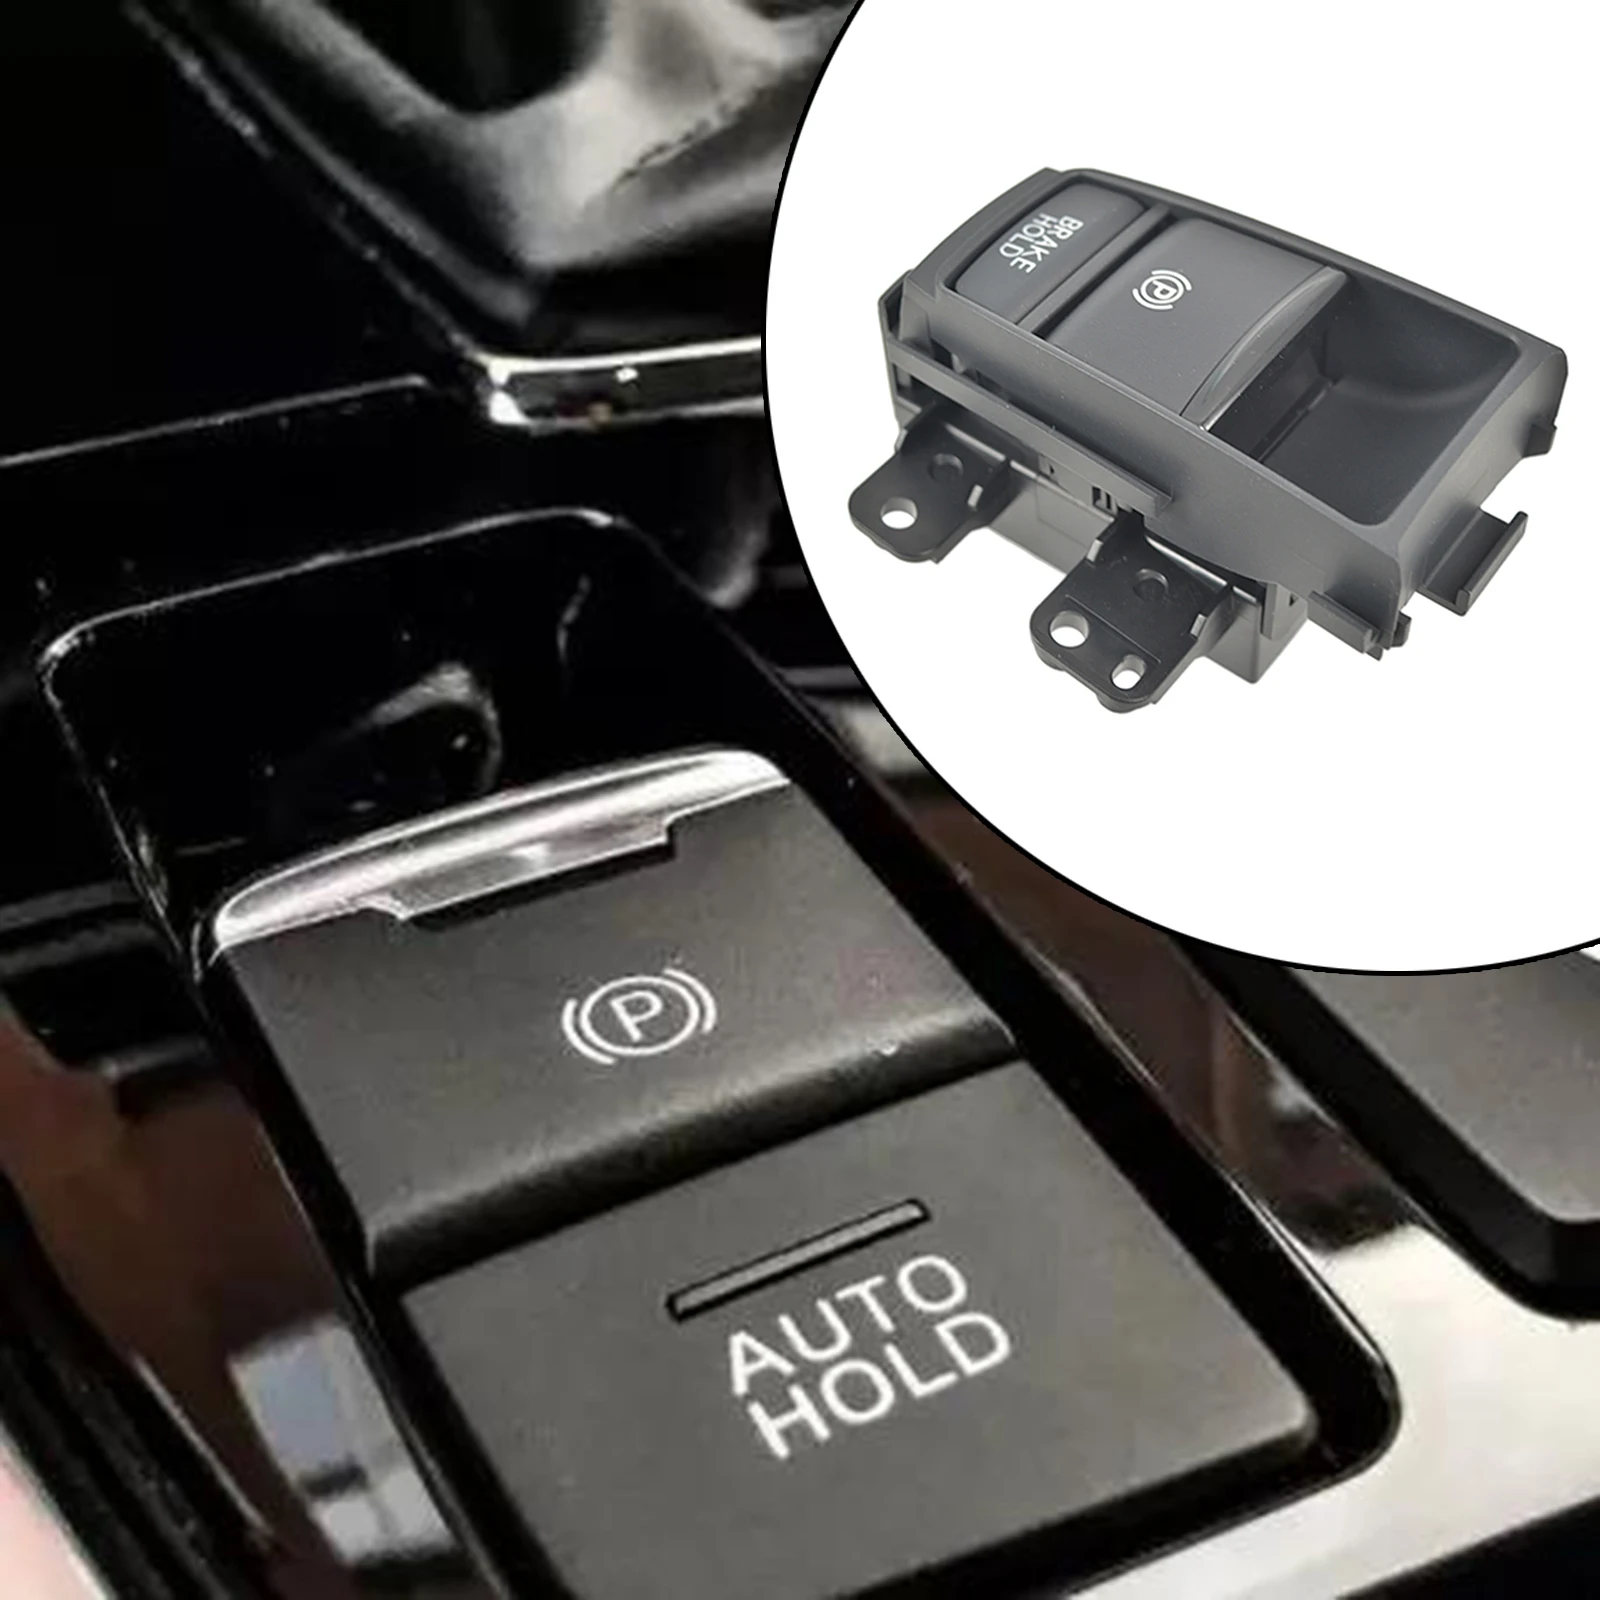 Electronic Auto Hand Brake Button Car Accessories 35355-T7A-J01 Parking Brake Switch Fit for Honda HR-V Xrv 2015-2020